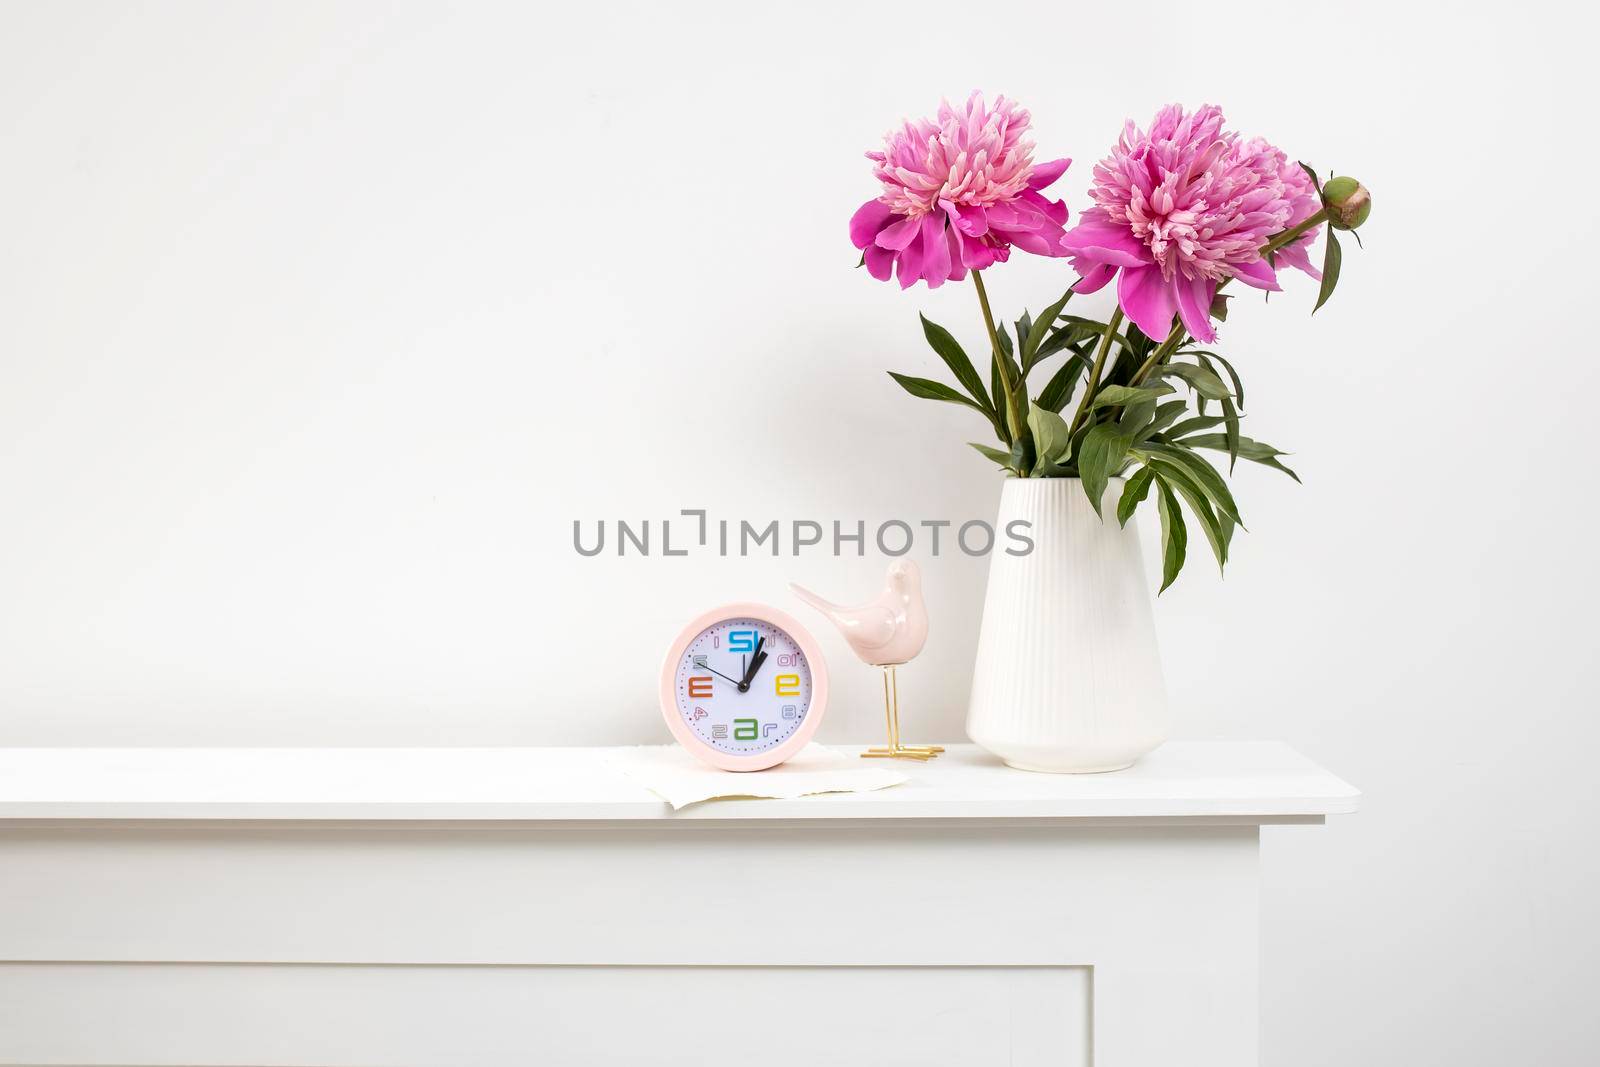 Red, pink peonies in a white vase on a table, clock, and against a white wall background by elenarostunova